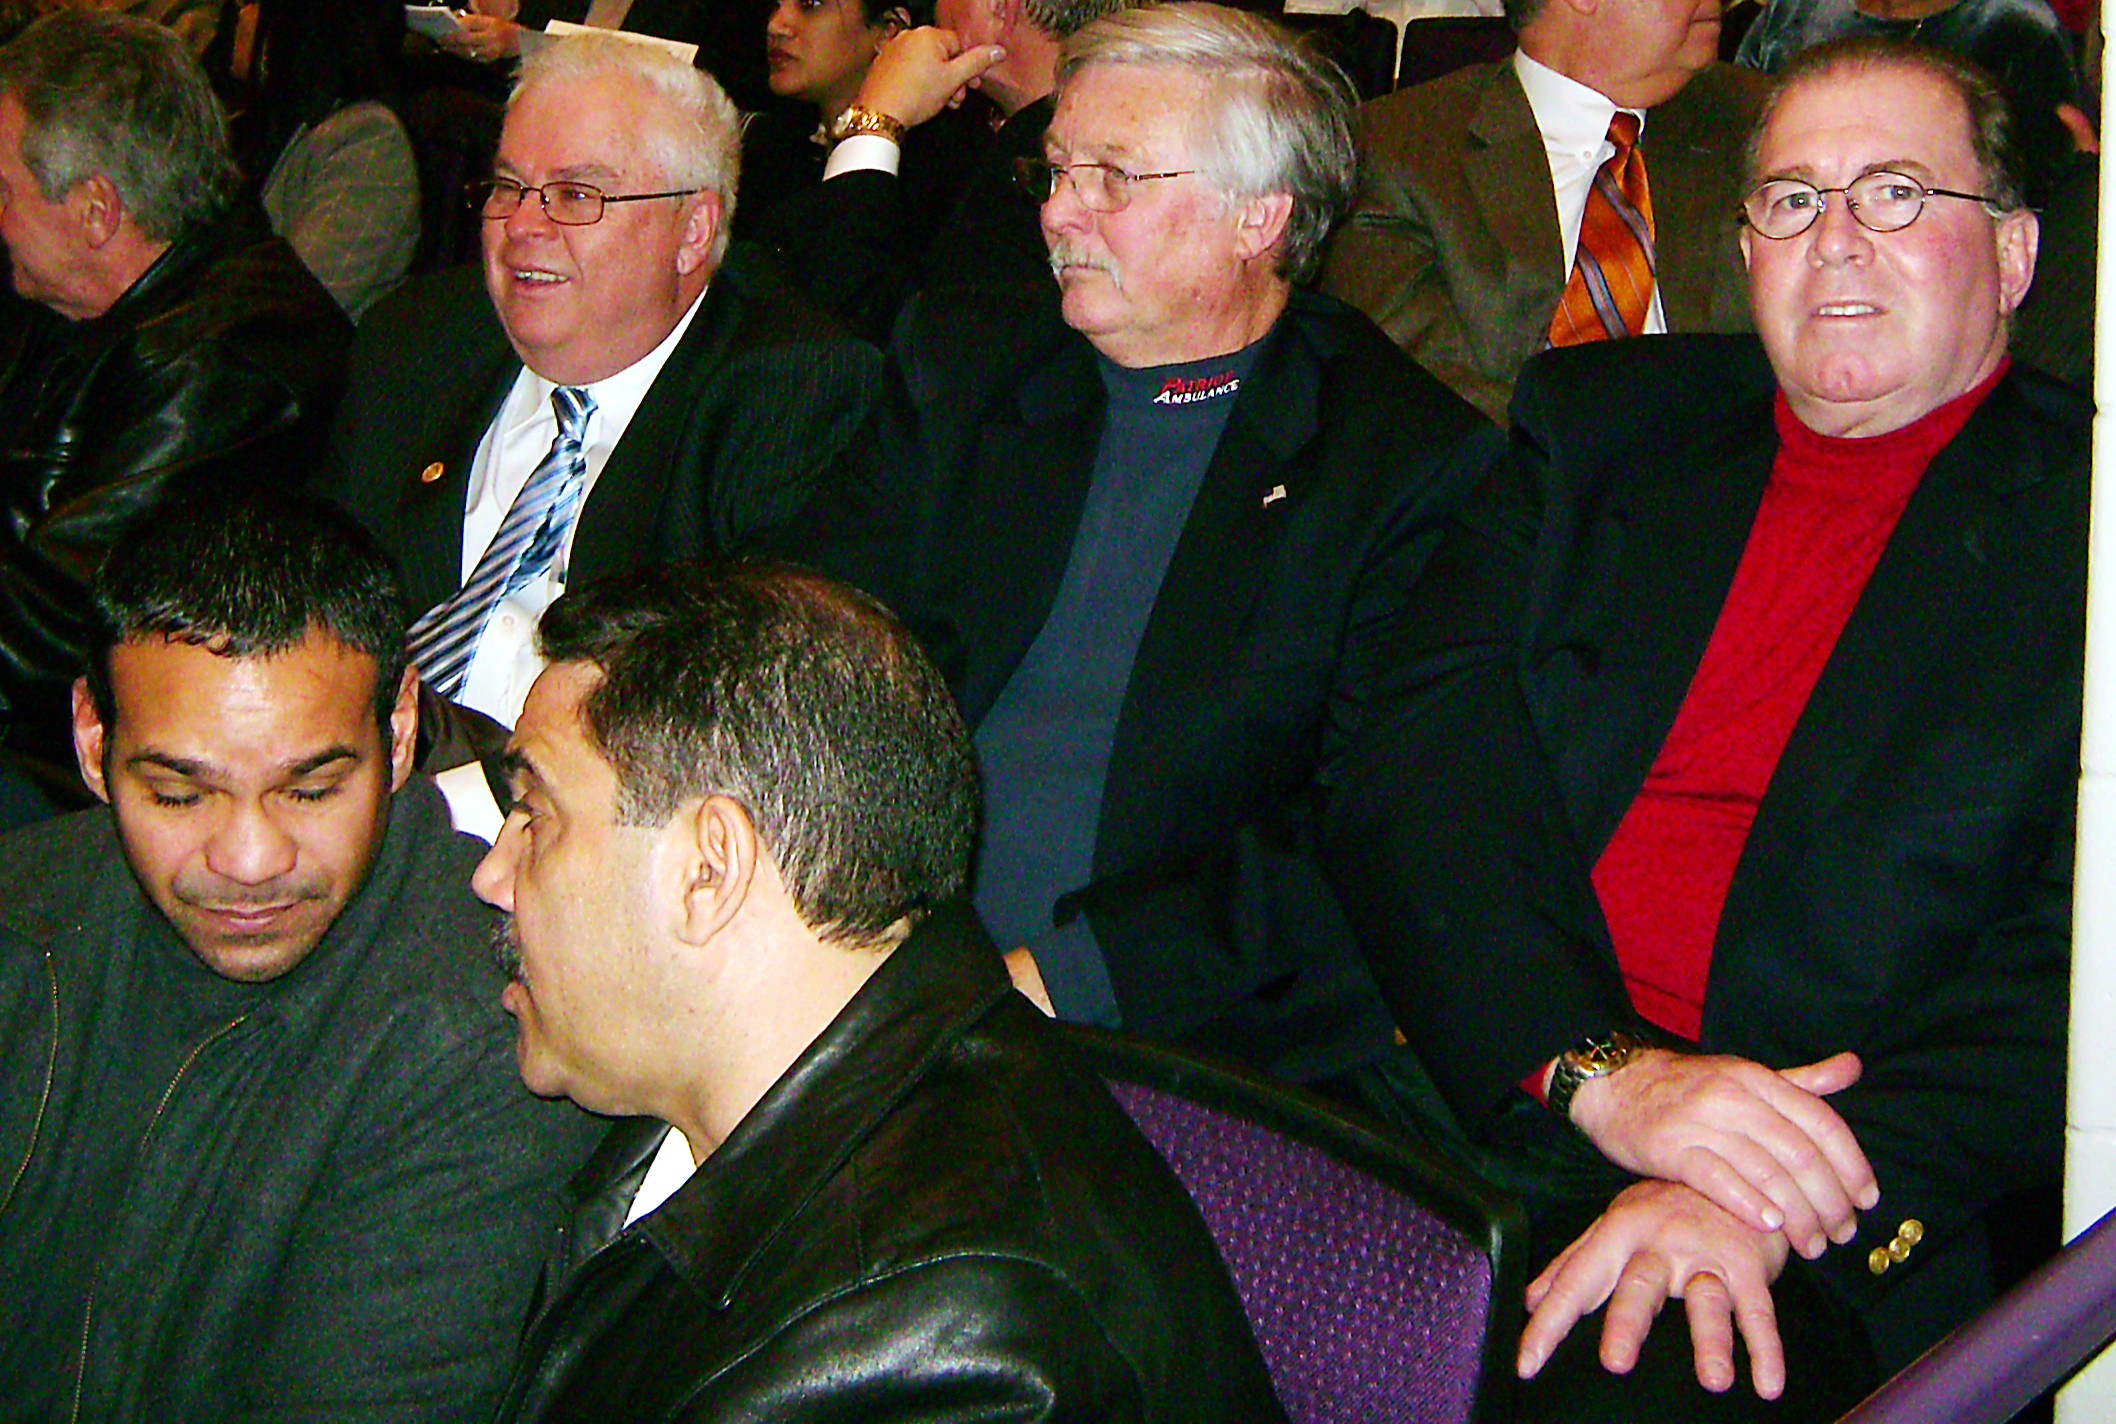 Patriot Ambulance Marketing Director John Felci (l), and Patriot Ambulance Owners Maurice Ryan and Dave Walton at Lantigua’s mayoral inauguration on January 4, 2010, just two days before Lantigua’s “transaction” with Patriot for two free ambulances and a school bus.